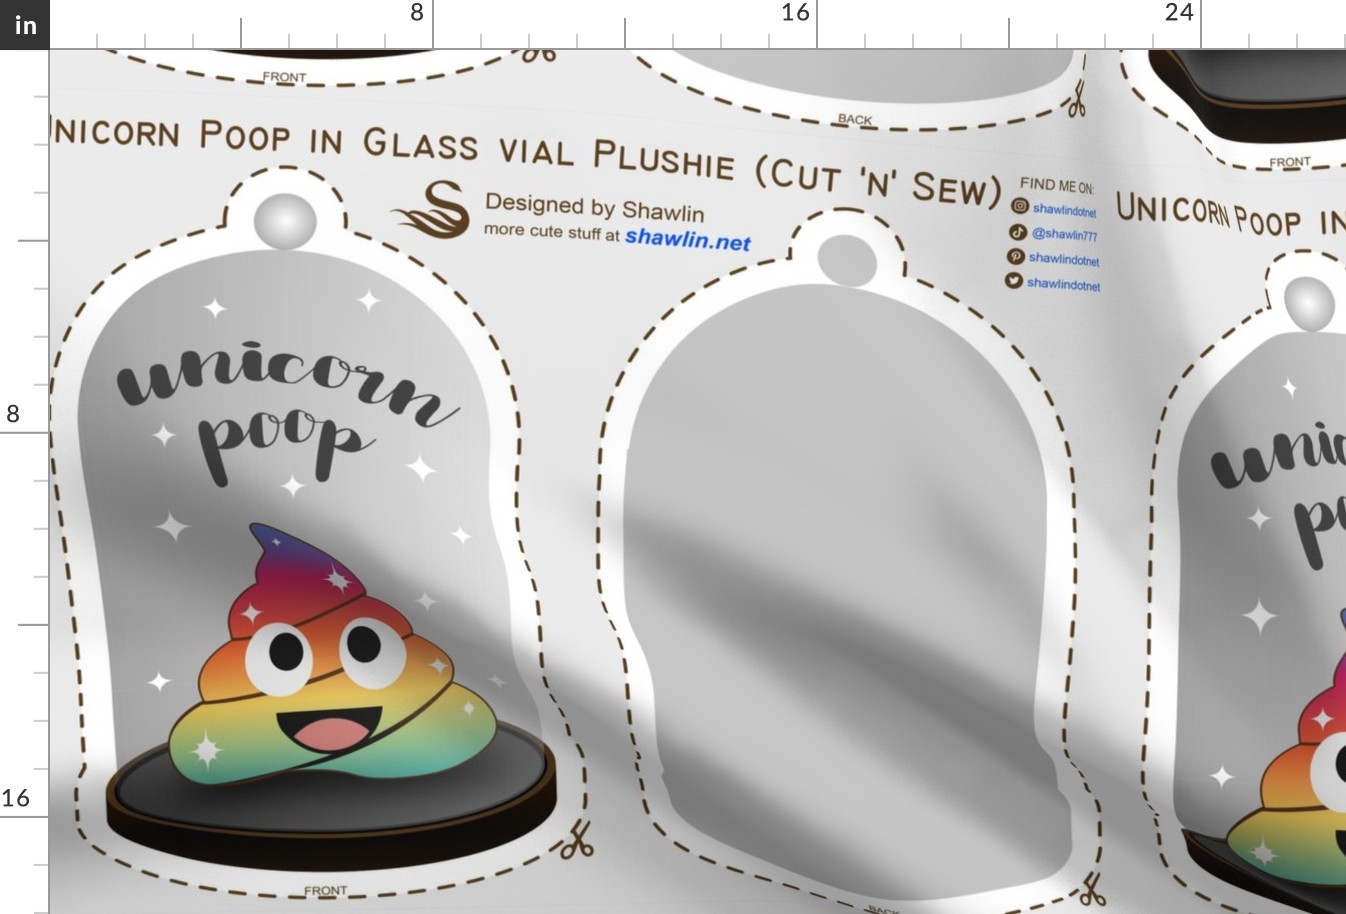 Cut and sew cute rainbow poop in glass vial plushie stuffed toy pillow DIY project. Cut 'n' Sew